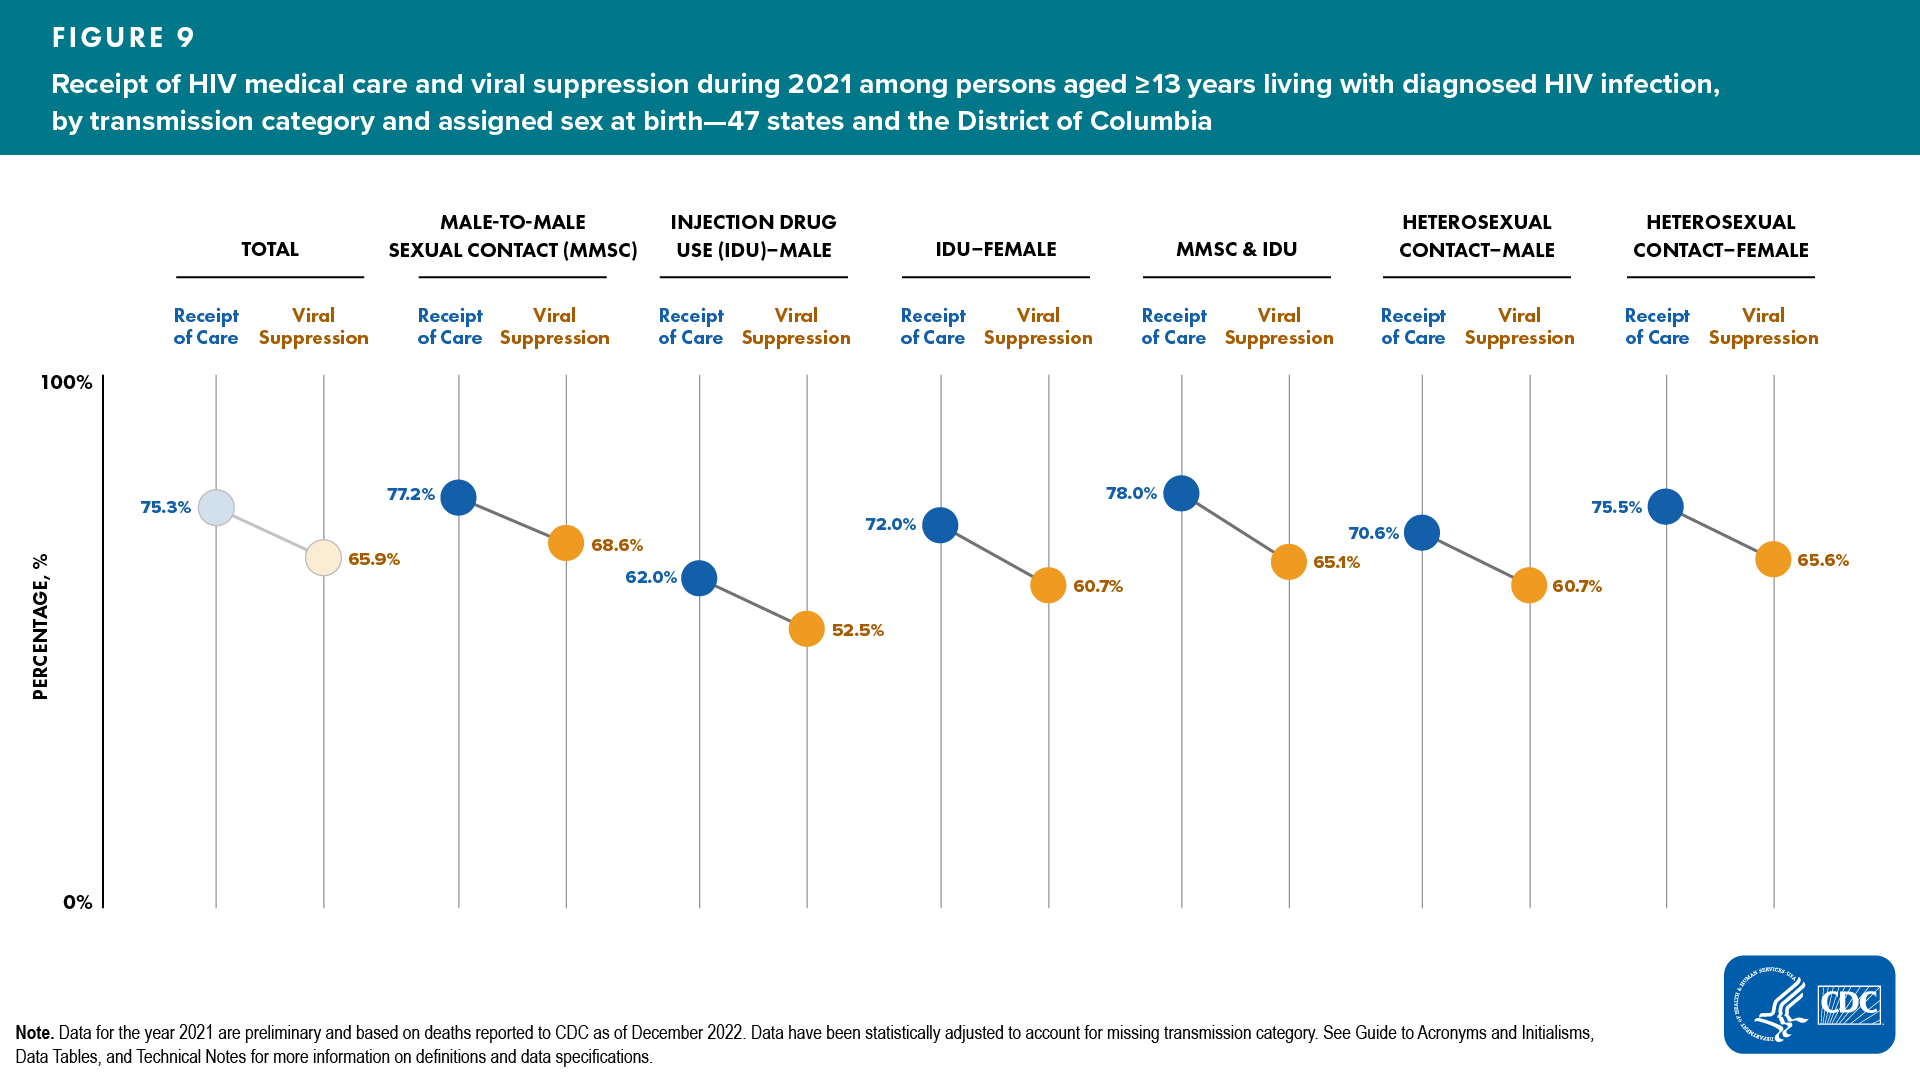 Figure 9. Receipt of HIV medical care and viral suppression during 2021 among persons aged ≥13 years living with diagnosed HIV infection, by transmission category and assigned sex at birth — 47 states and the District of Columbia